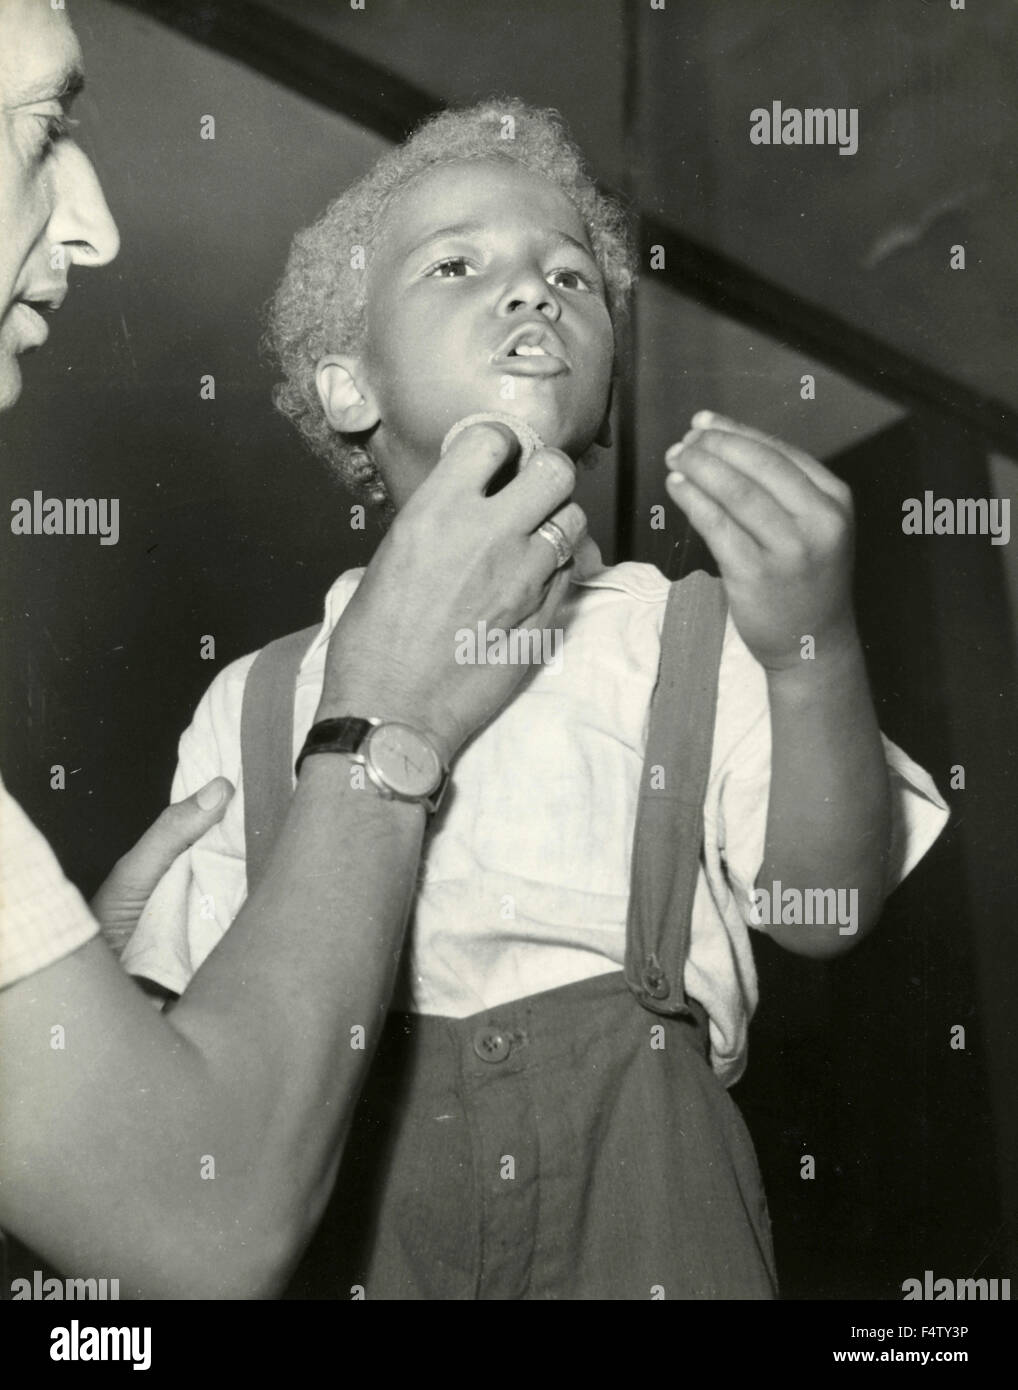 The child actor Angelo Maggio in the makeup on the set of the movie 'Angelo tra la folla', Italy Stock Photo